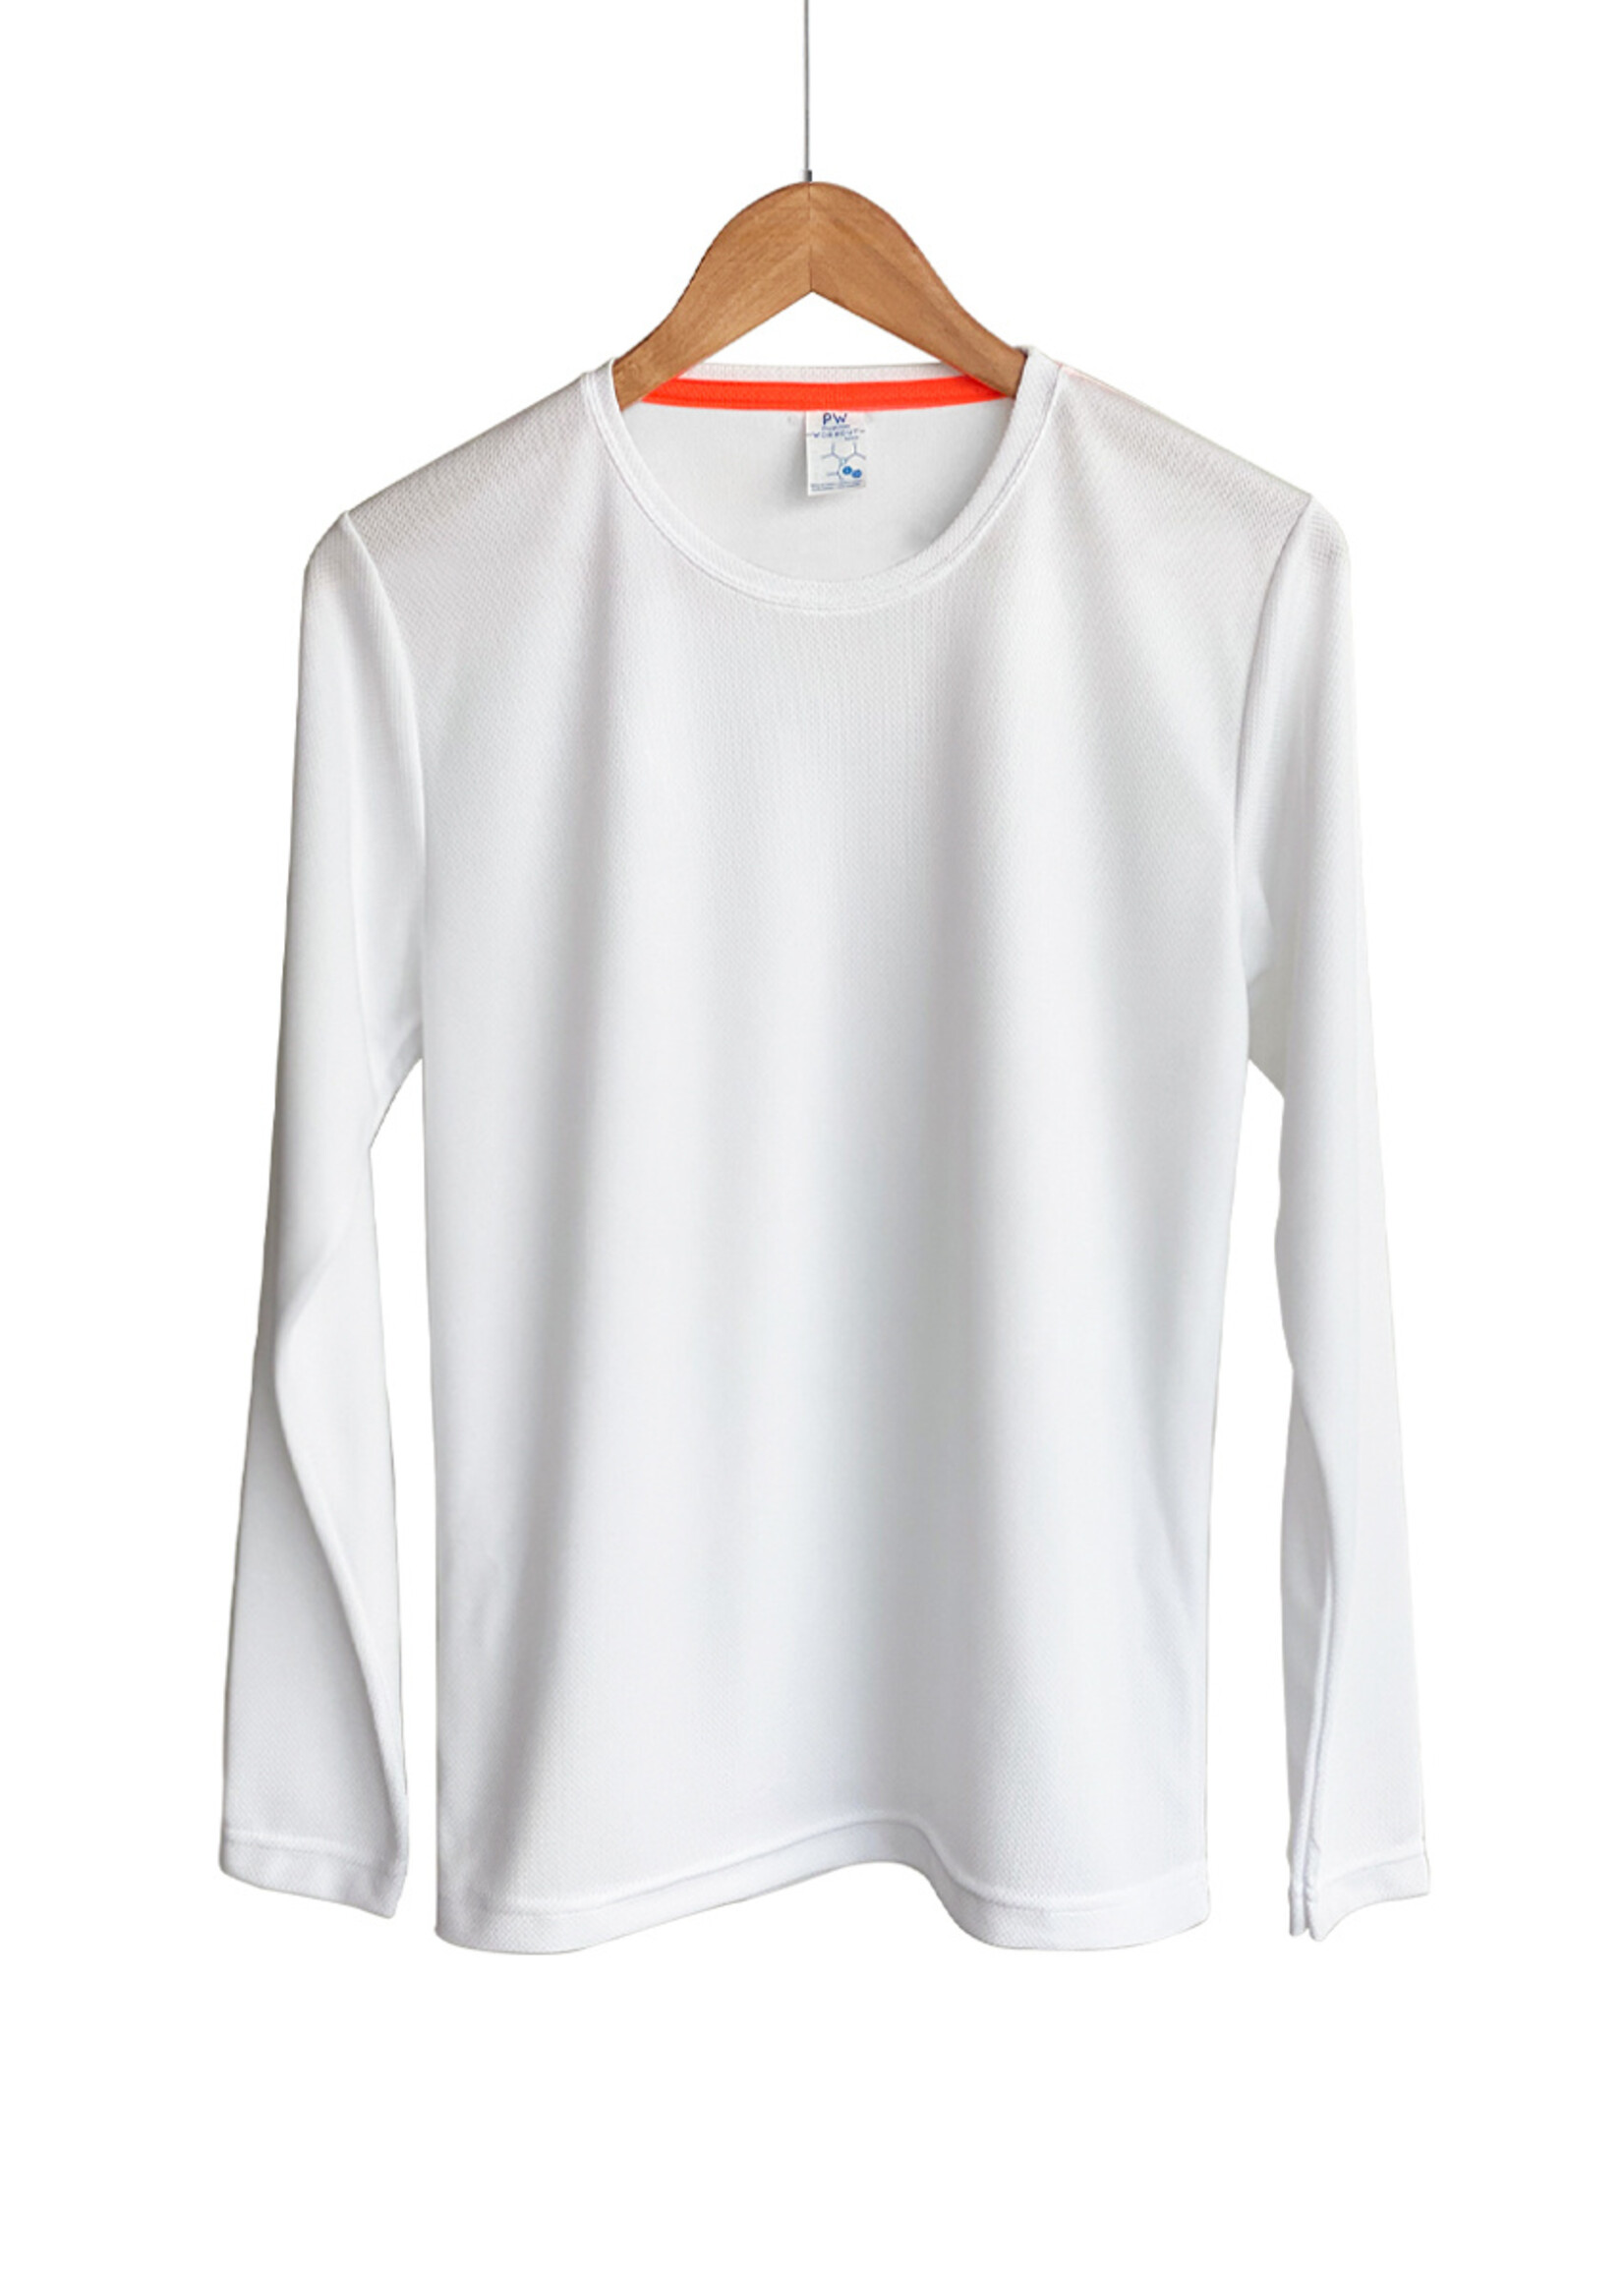 Playerytees STYLE 950CL - POLYESTER SPORT CREW NECK LONG SLEEVE 100% POLYESTER